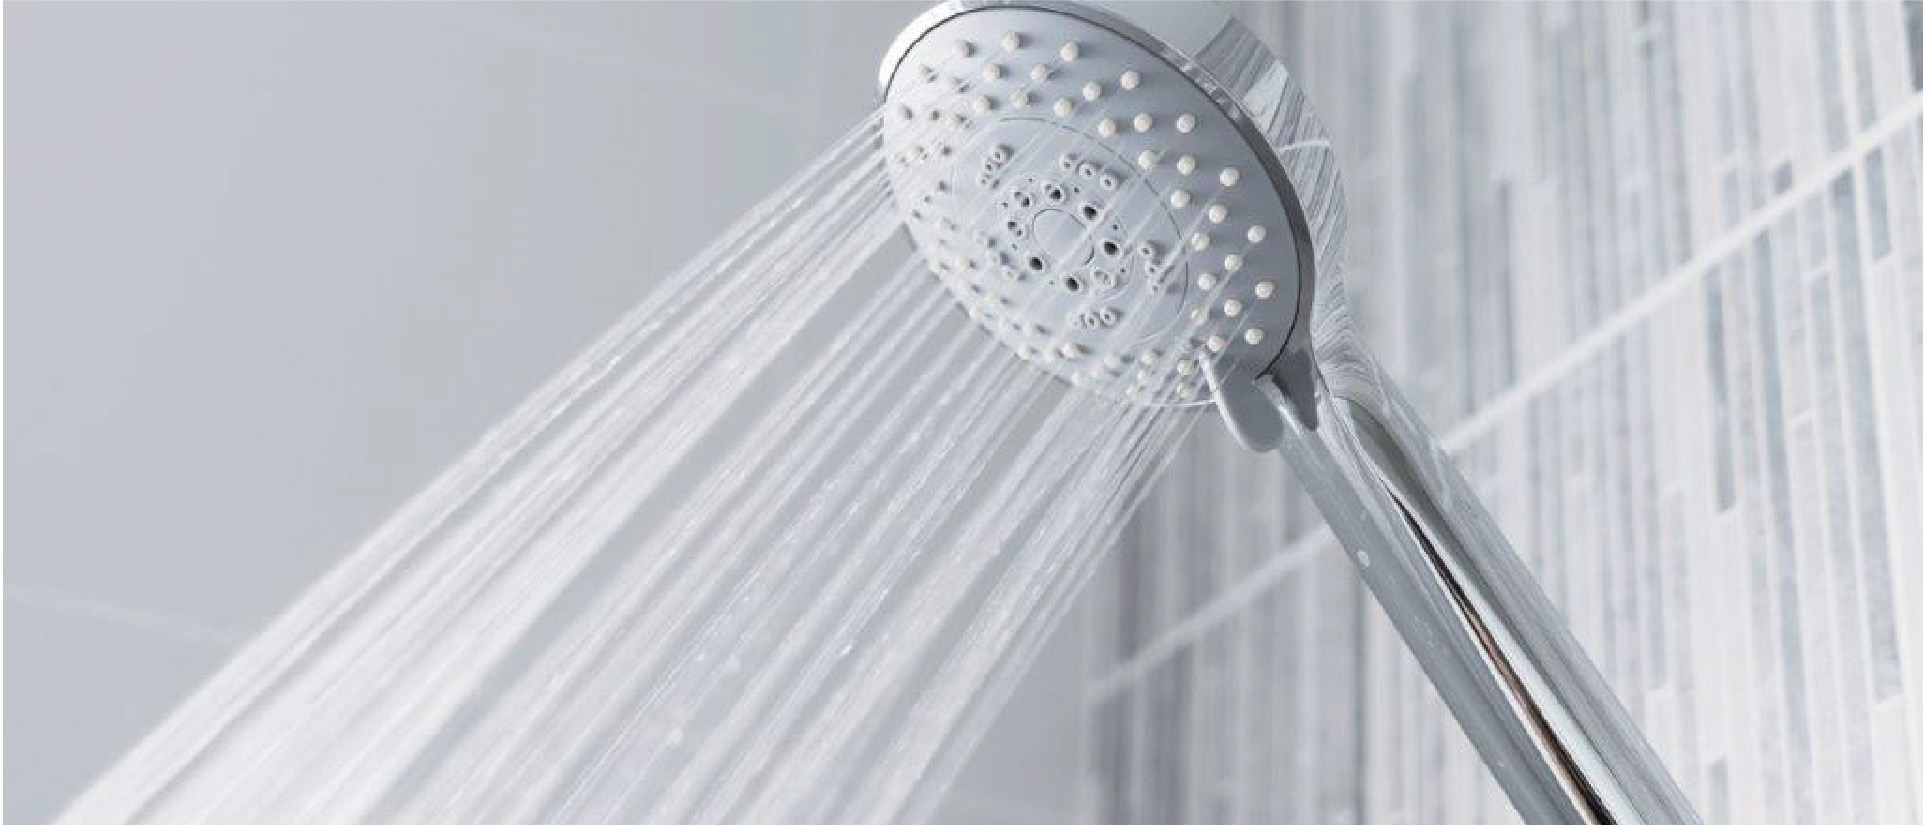 Shower head spouting a large jet of water.